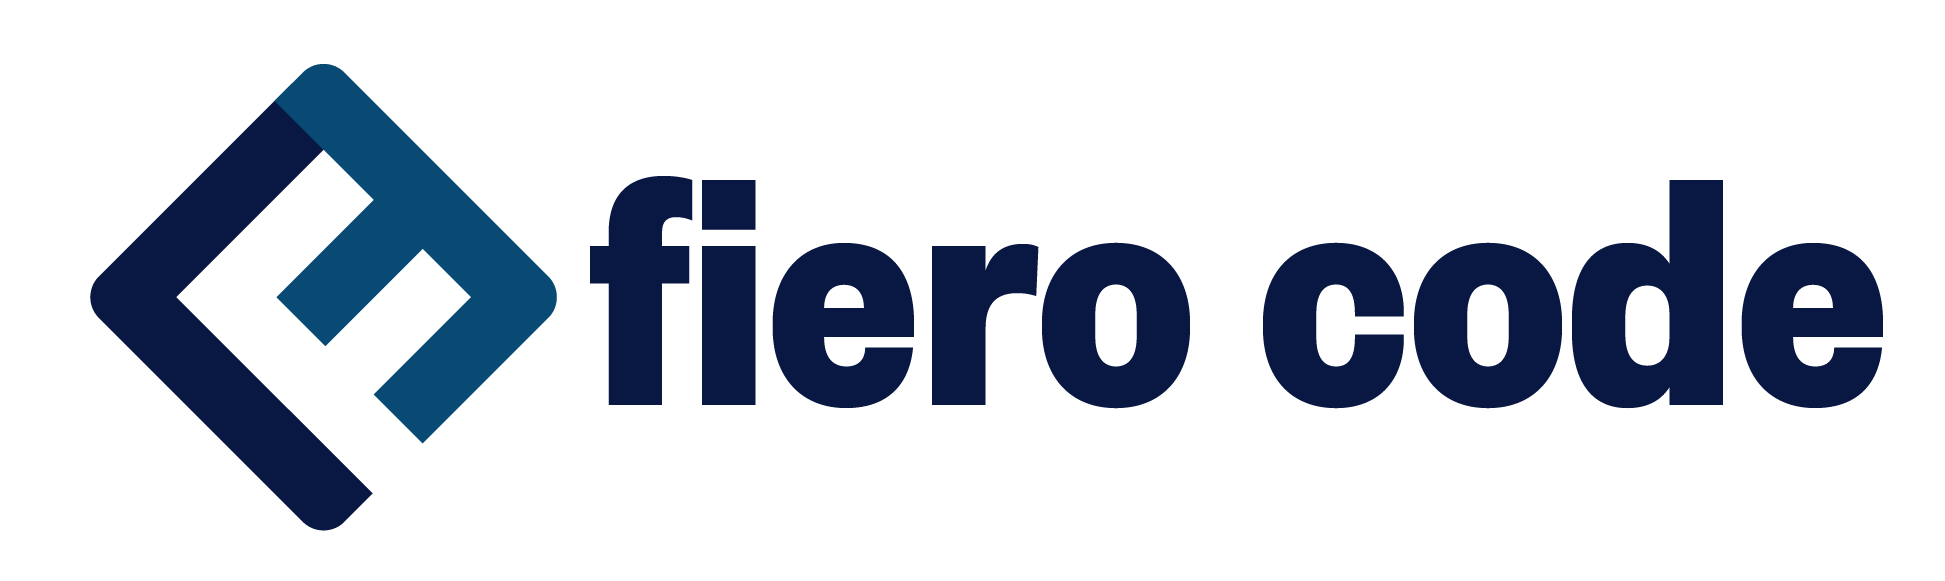 Fiero Code  Coding education for schools and libraries